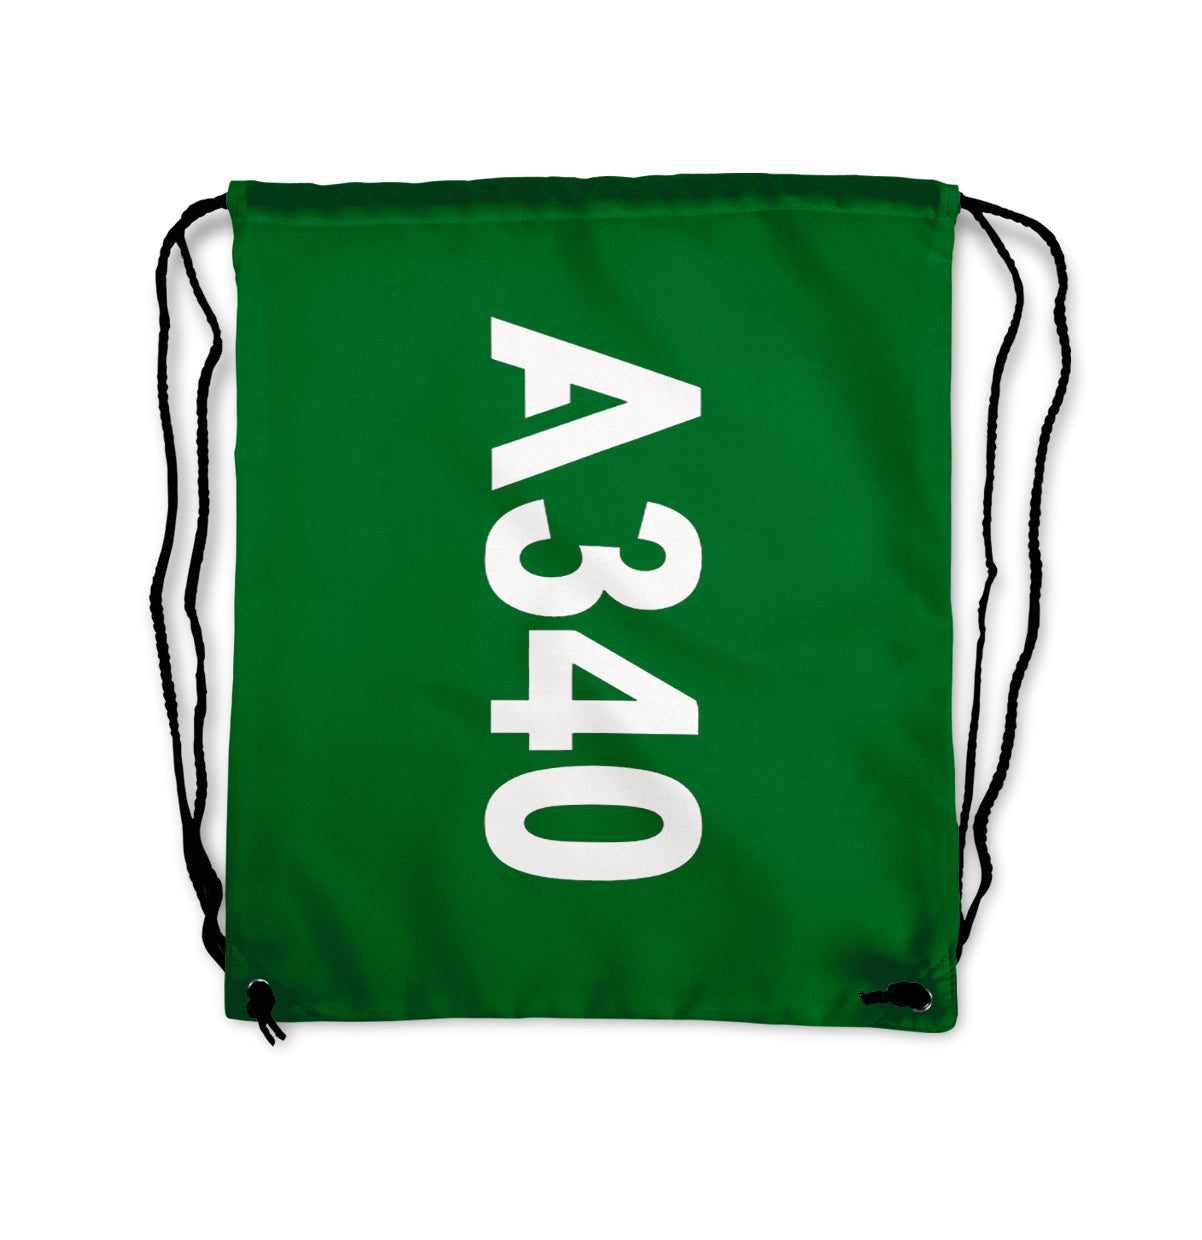 A340 Text Designed Drawstring Bags